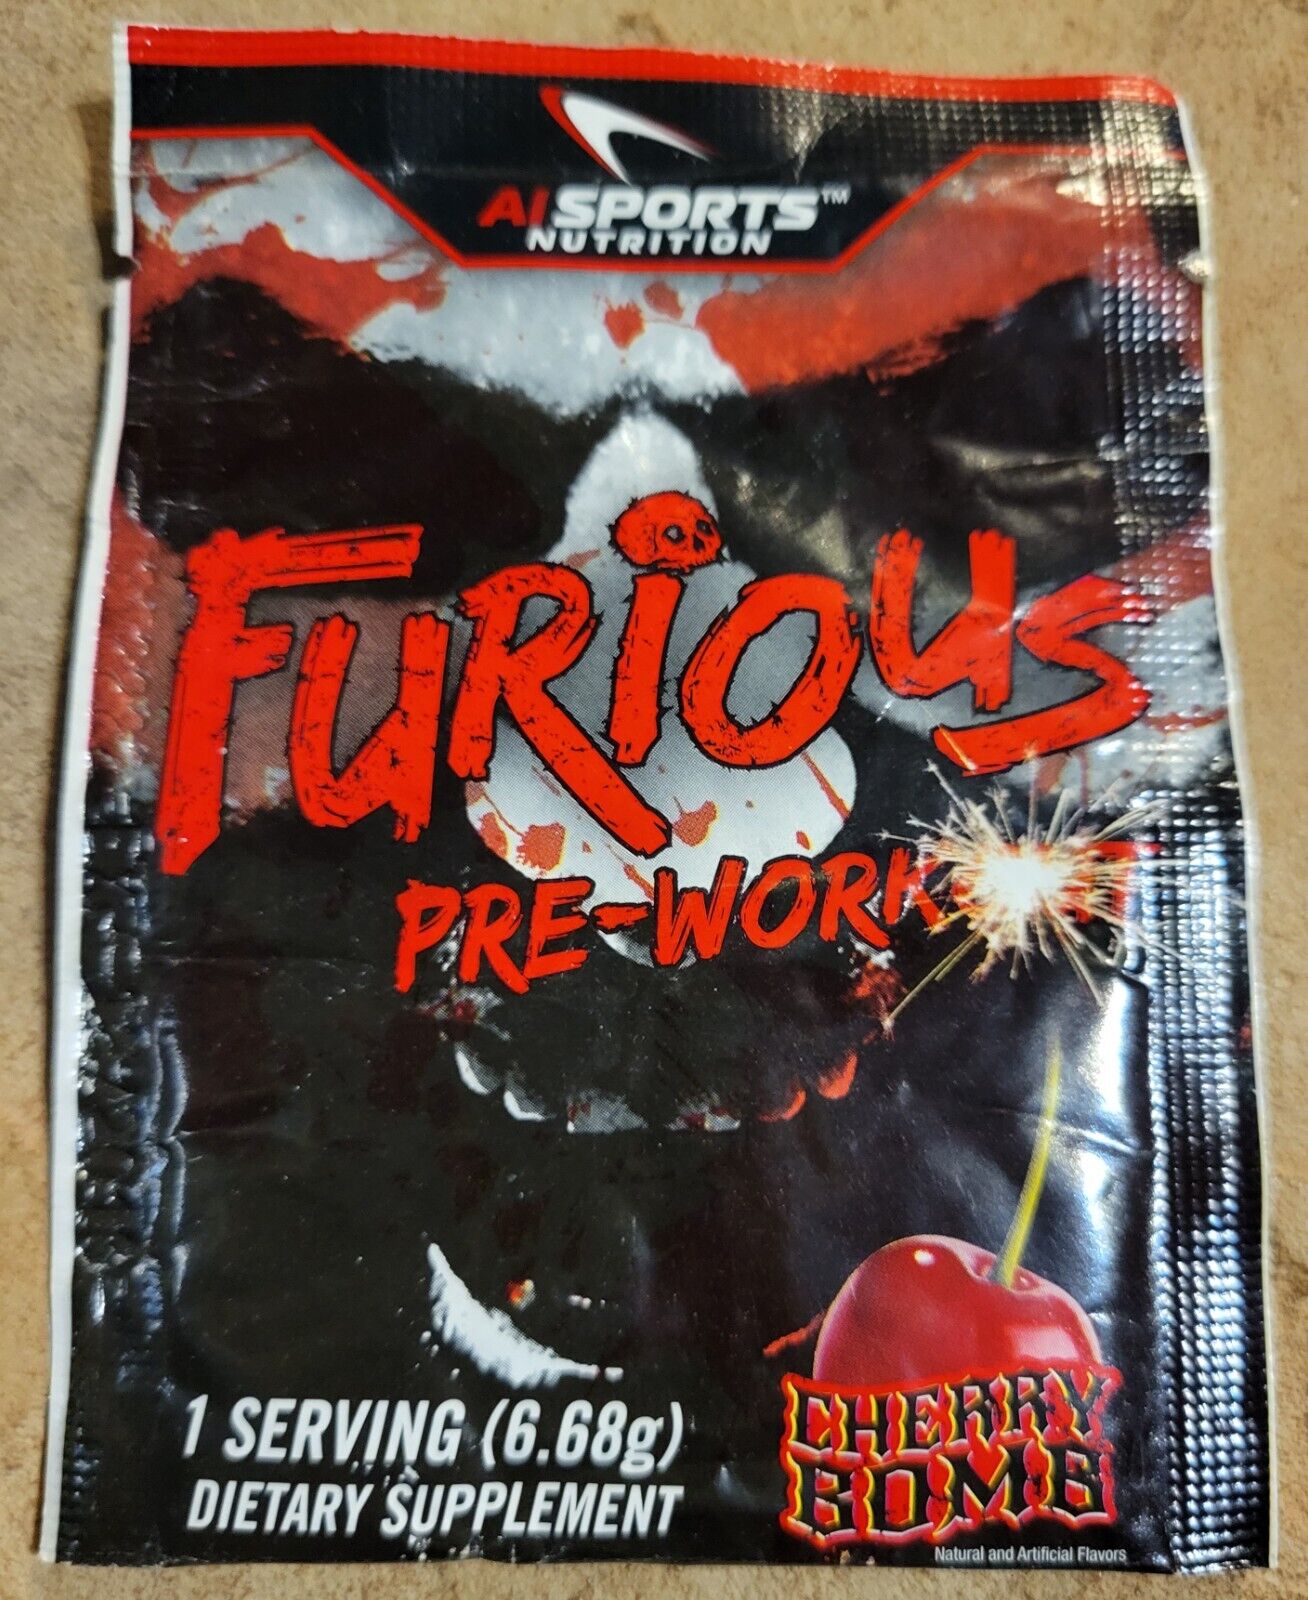 A1 Sports Nutrition Furious Pre-Workout Sealed Pack Expired 2018 Cherry Bomb